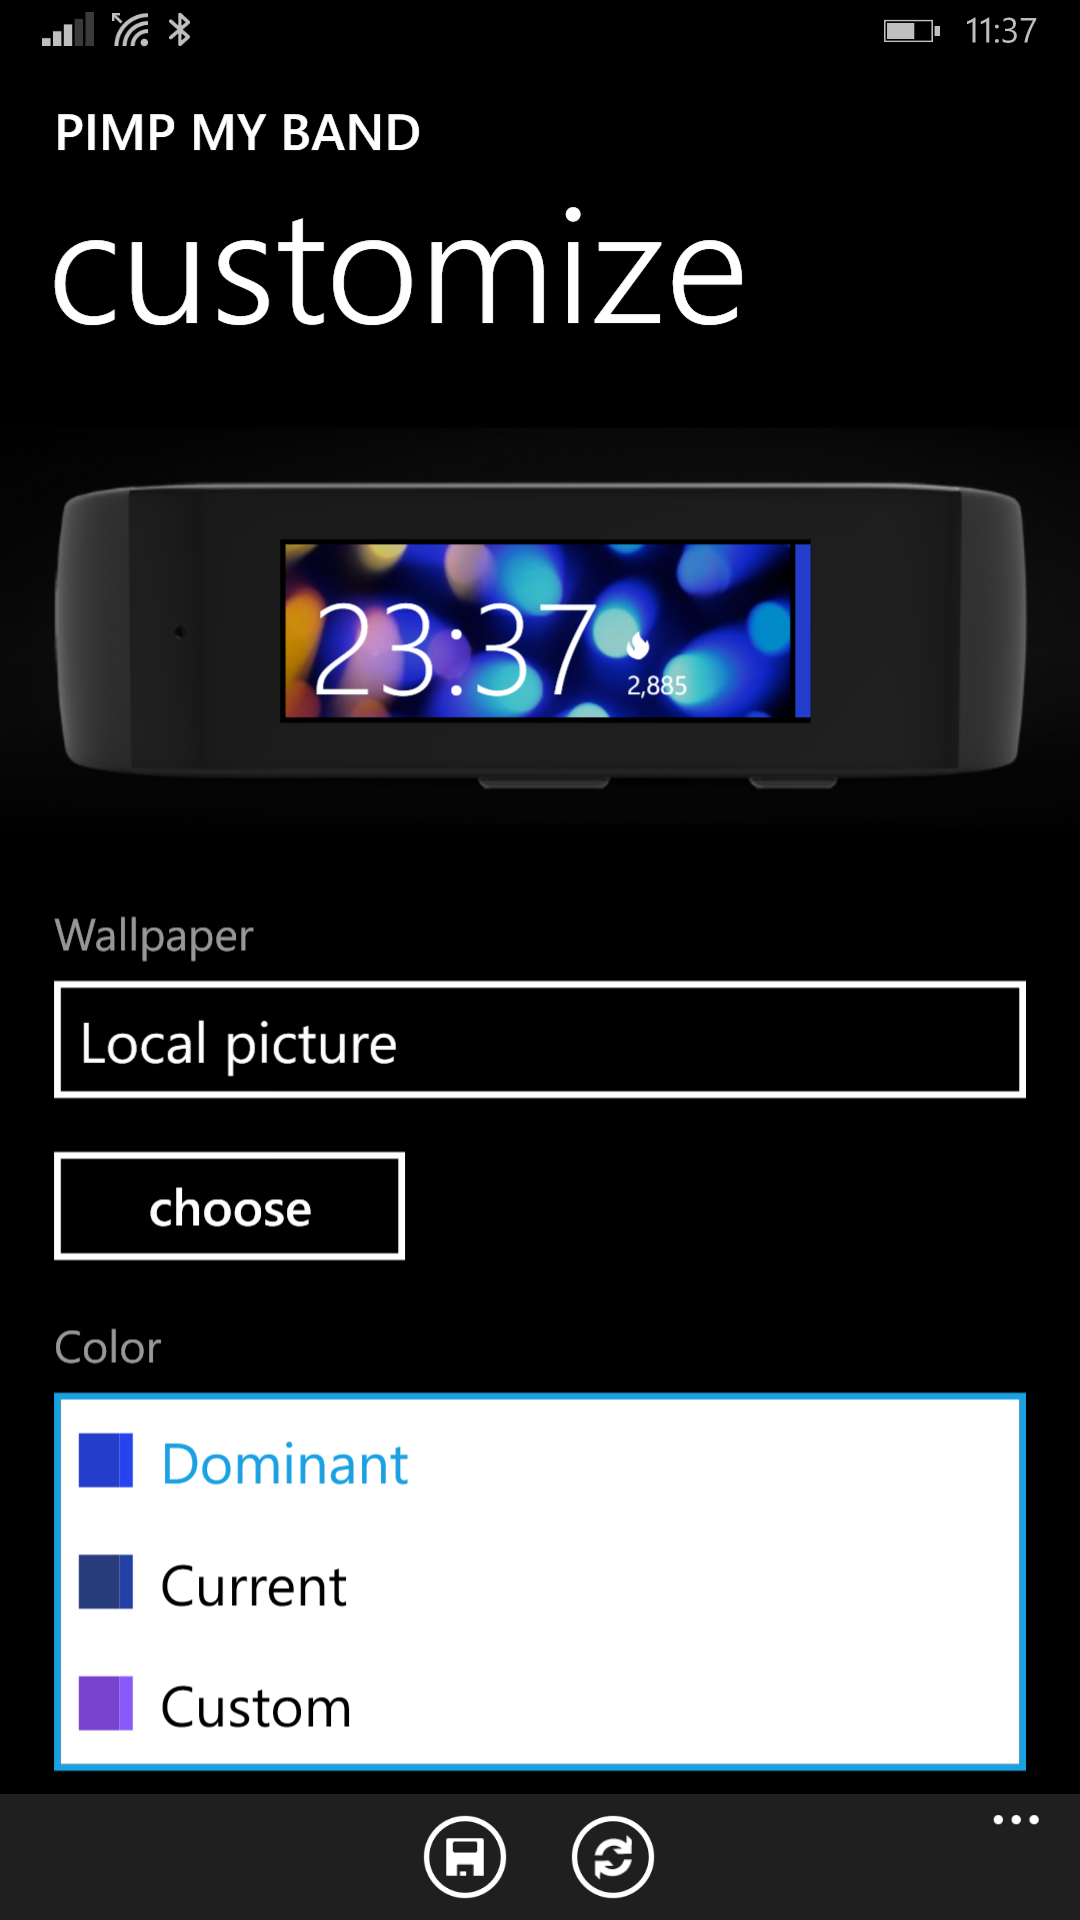 Pmb Will Sync Your Background Wallpaper And Accent Color To Band